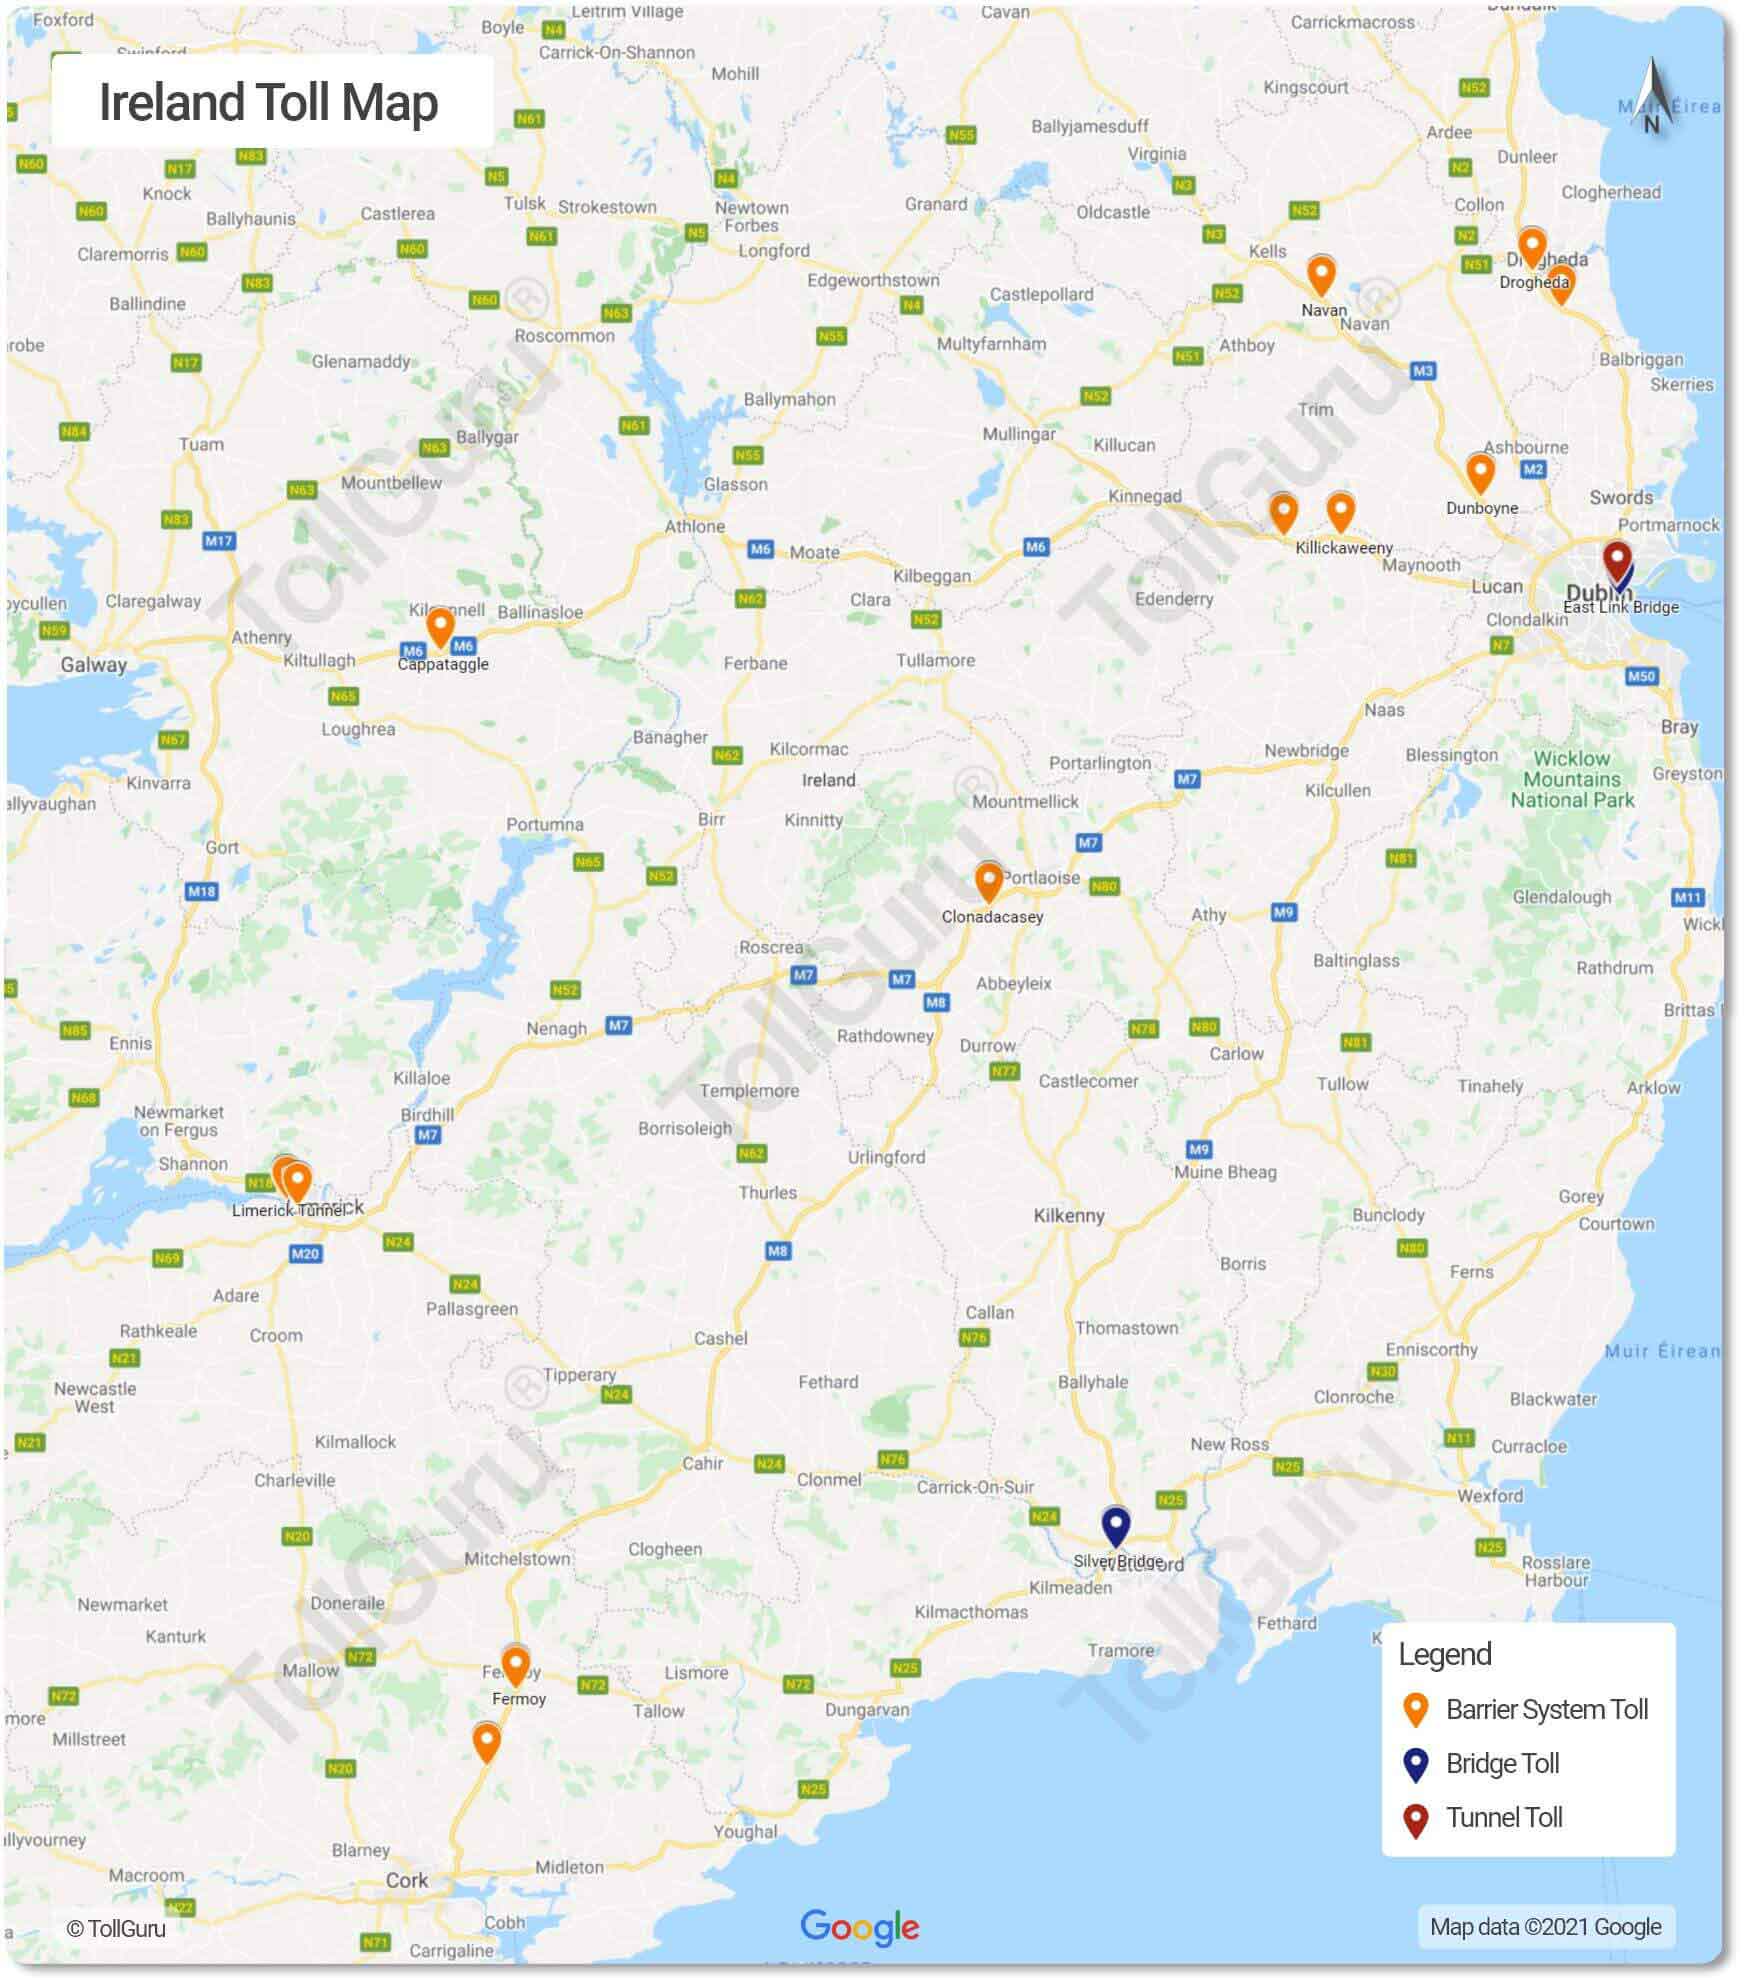 The toll plazas in Ireland of all motorways, bridges and tunnels including Dublin tunnel, East Link bridge, and M1 Motorway.